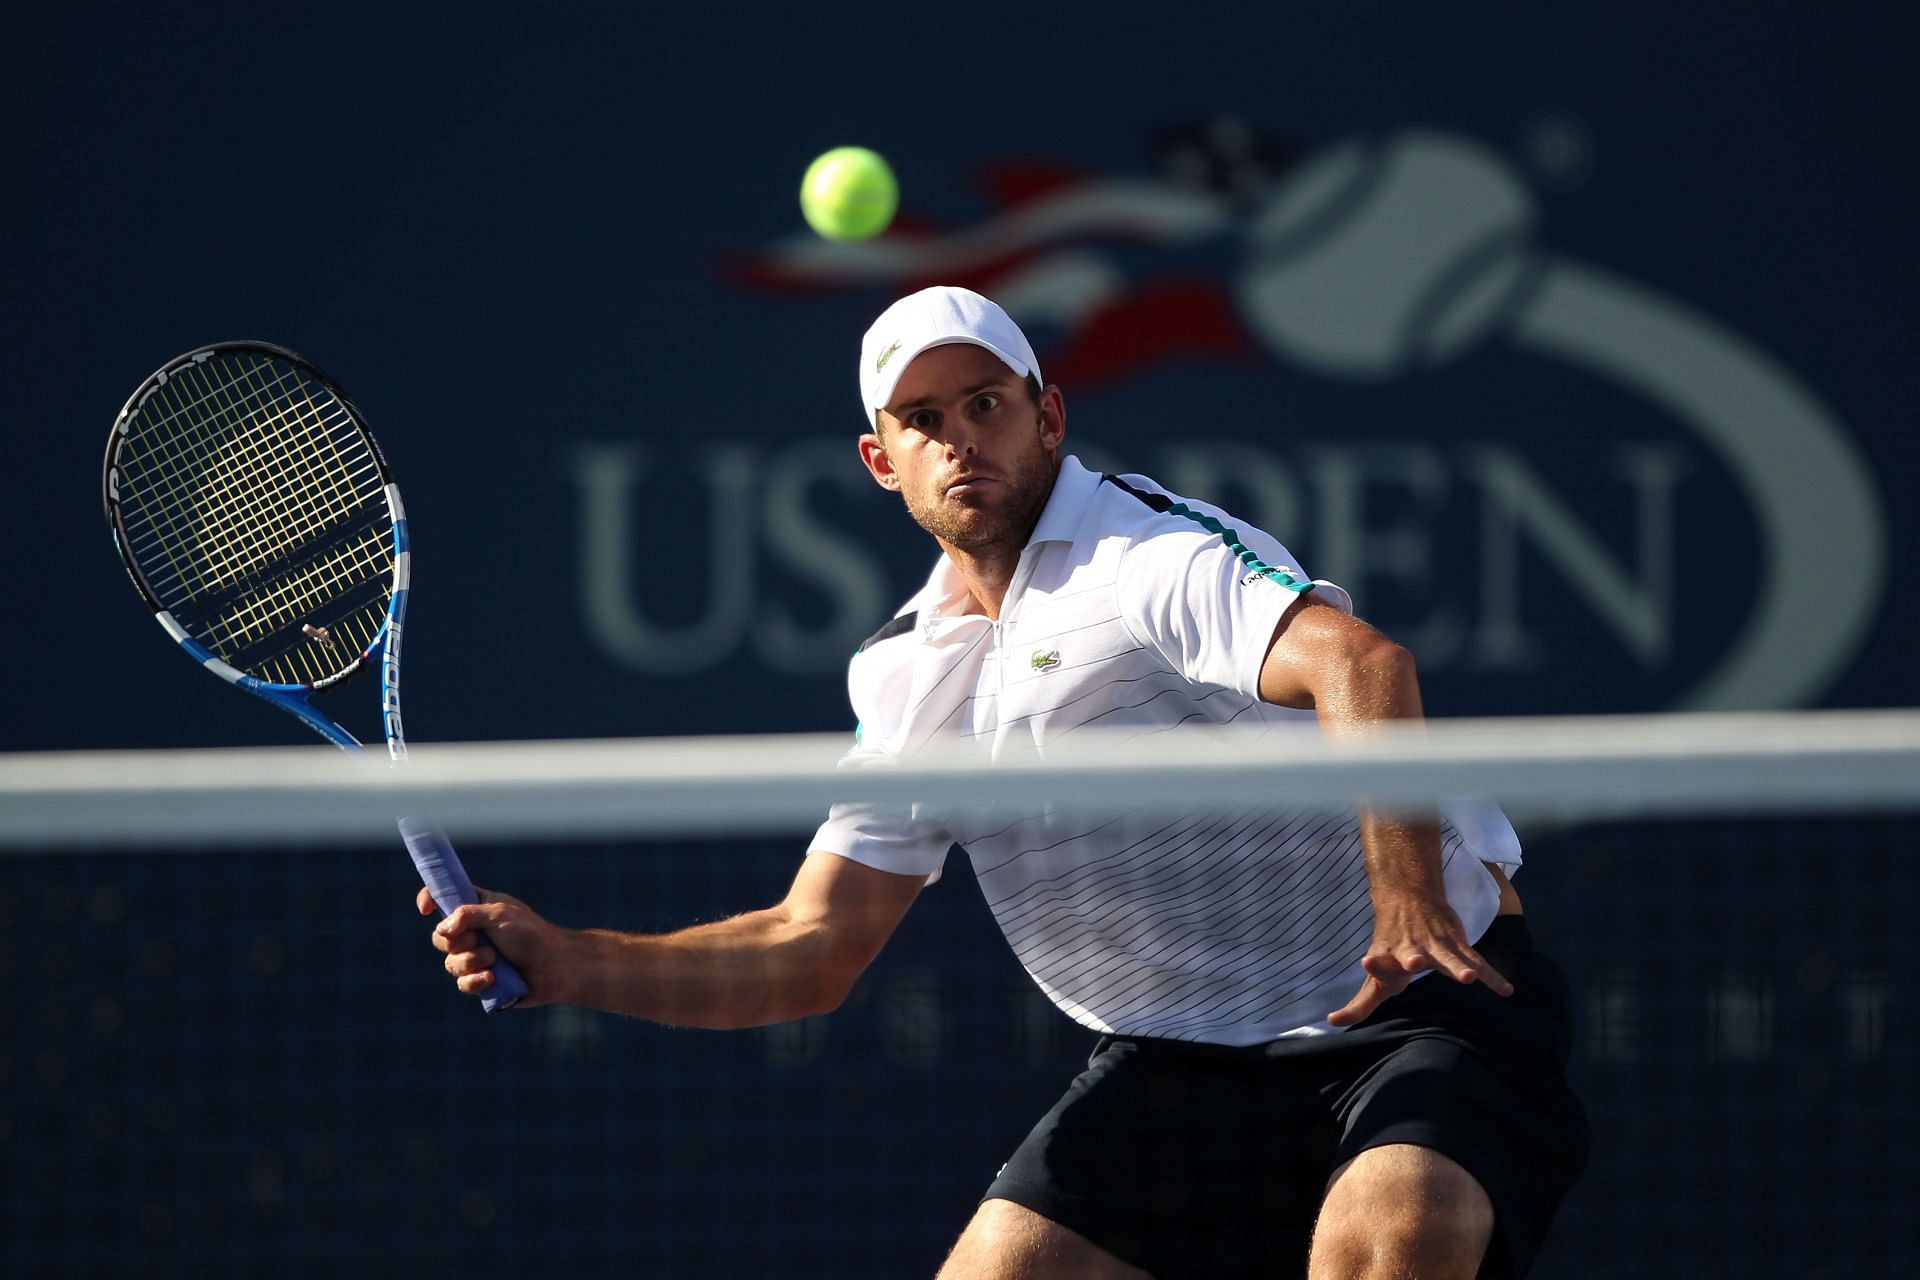 Roddick in action against Rafael Nadal at the 2011 US Open